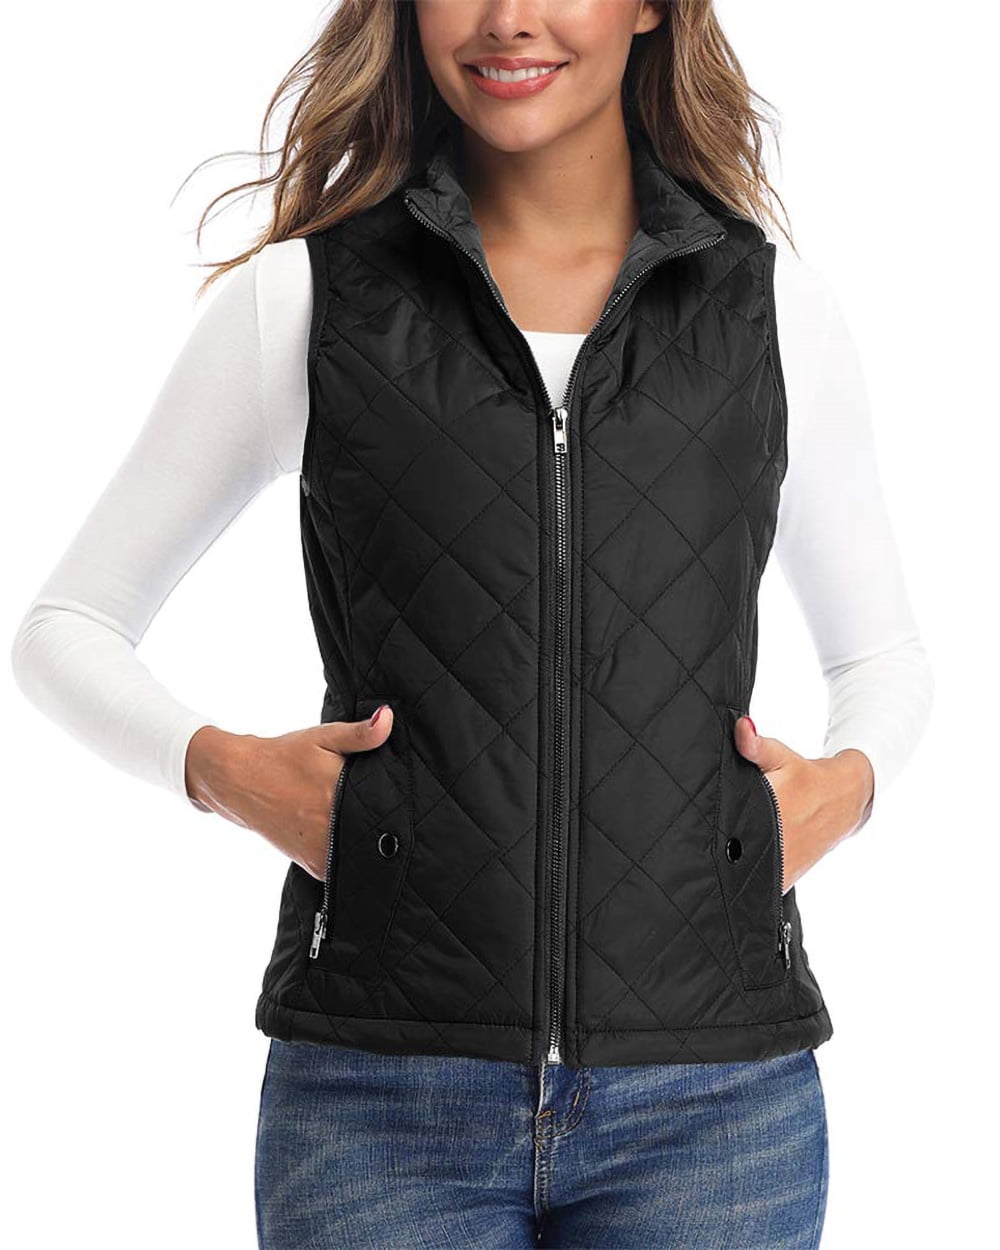 MISS MOLY Vests For Women Casual Lightweight Full-Zip Military Vest Golf  Sleevel